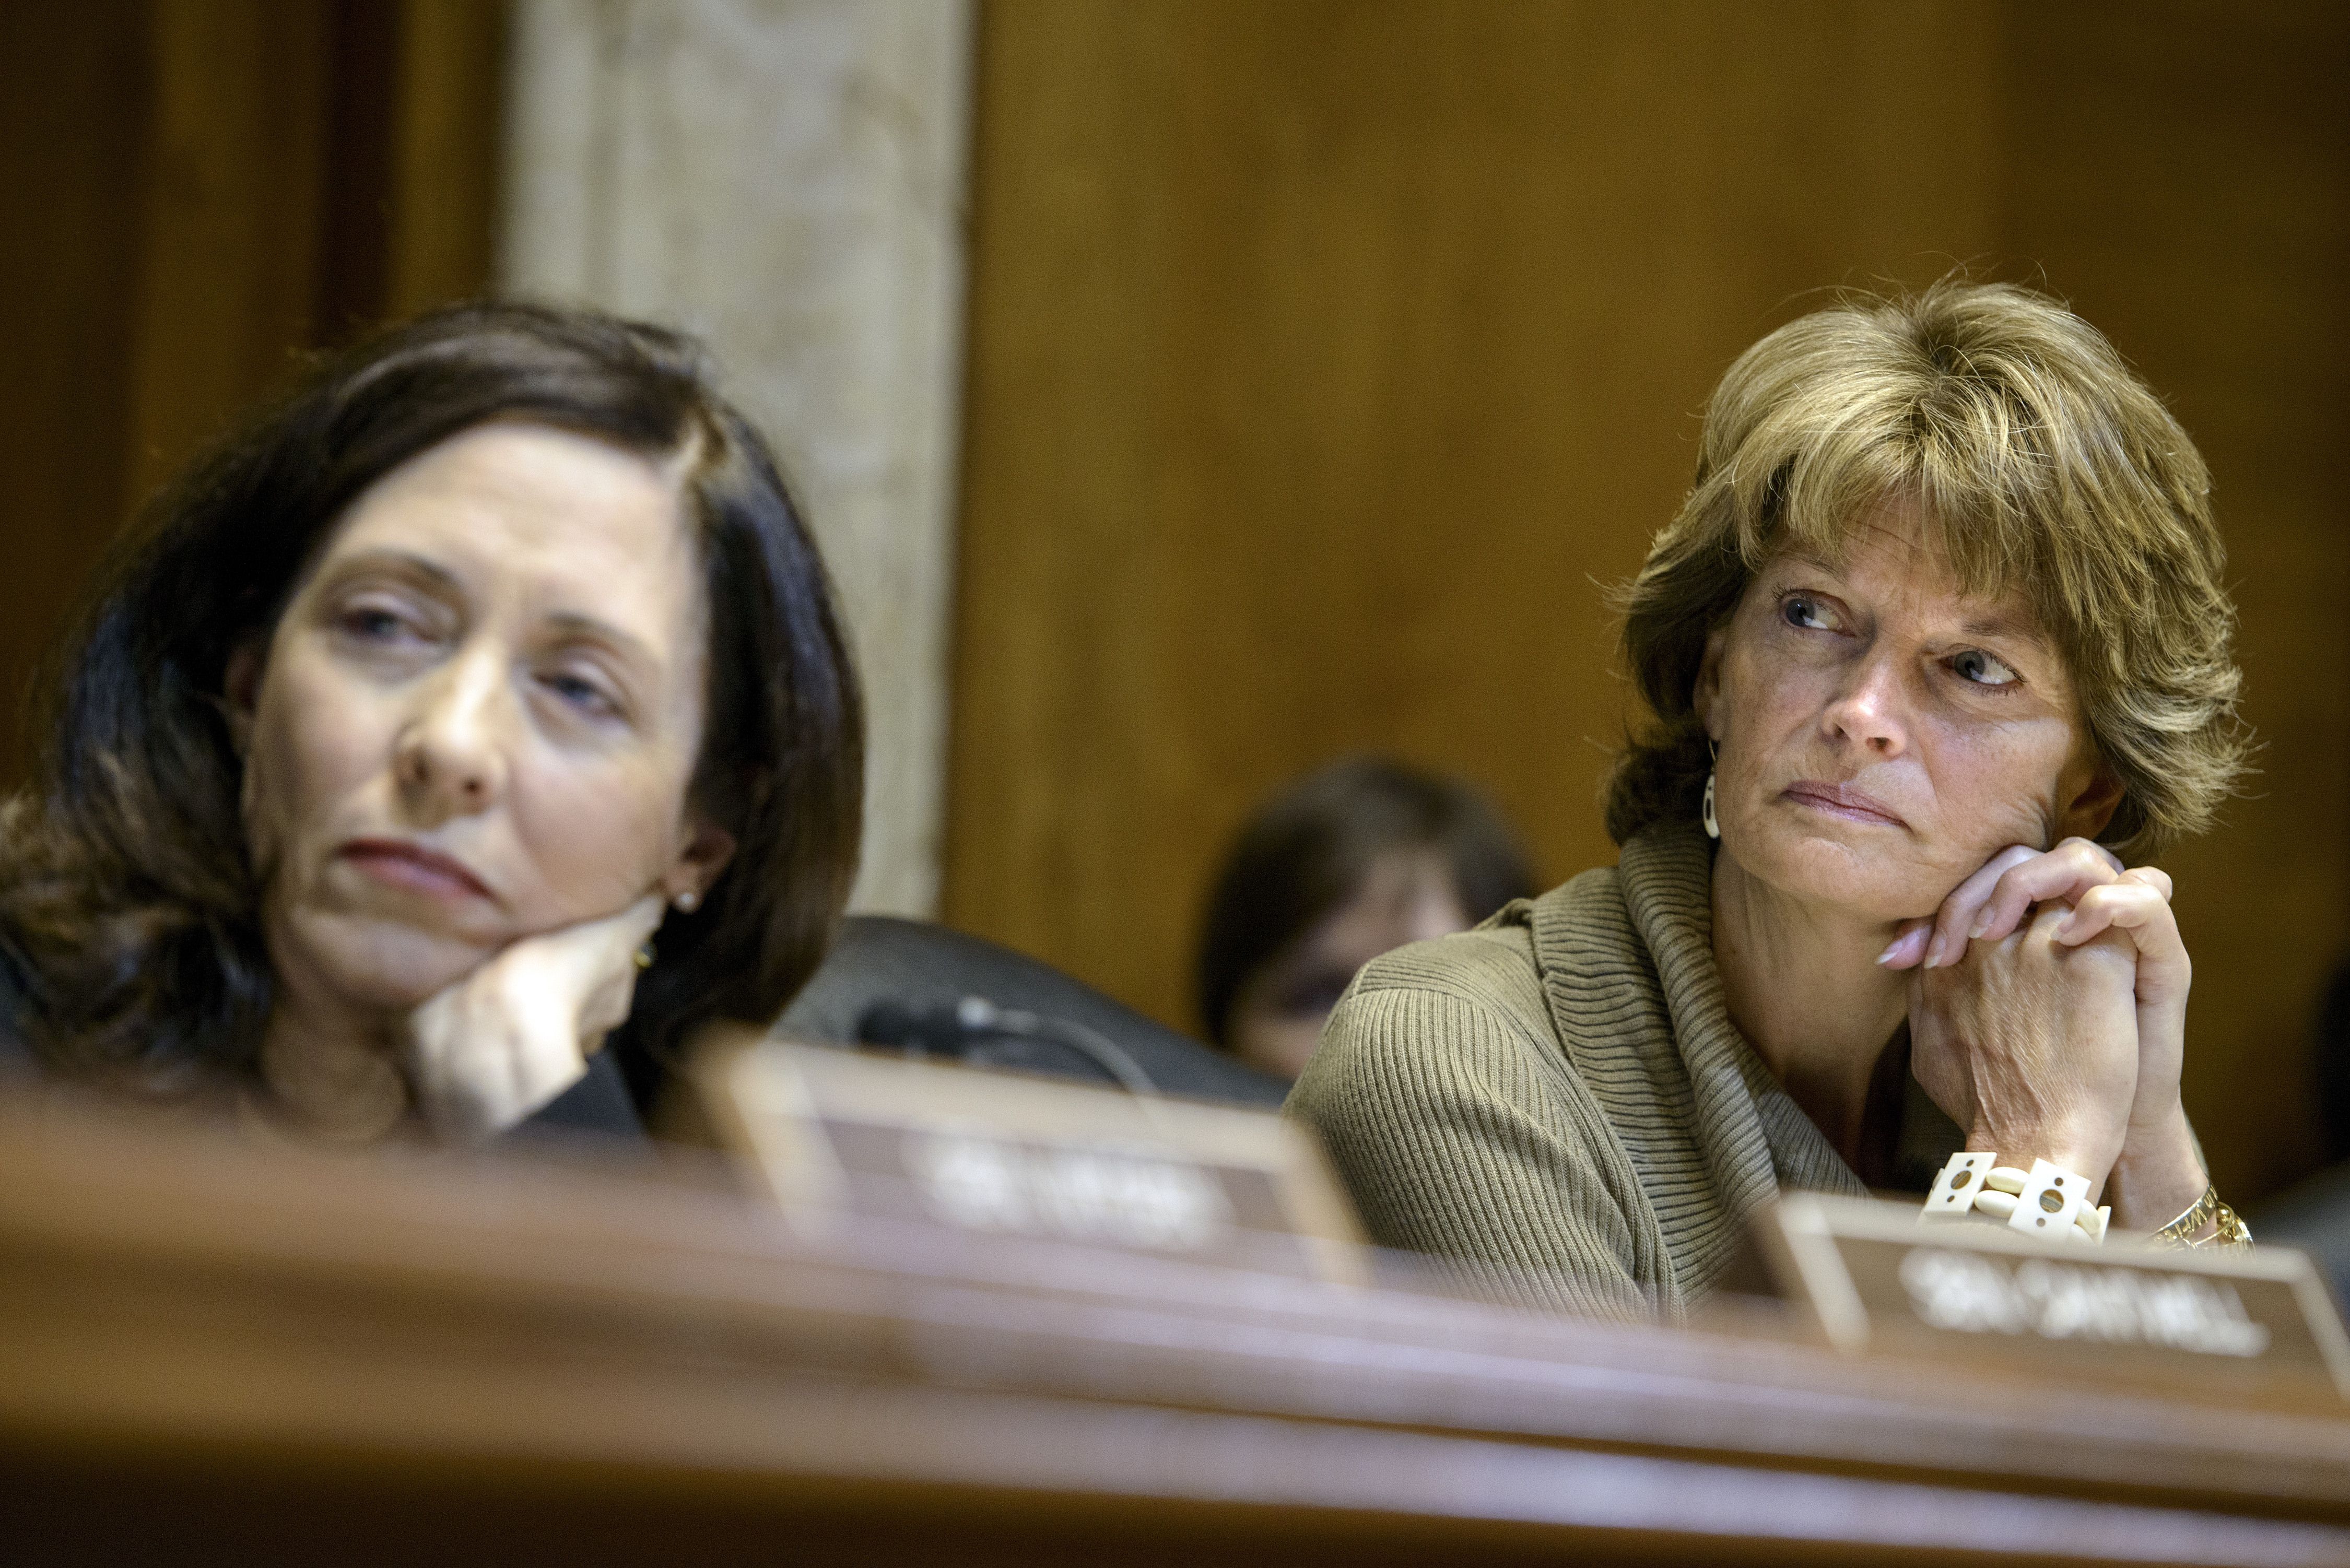 Alaska senator Lisa Murkowski  listens during a session of the Senate Energy and Natural Resources Committee on Capitol Hill January 8, 2015 in Washington, DC.  (Brendan Smialowski/AFP/Getty Images)